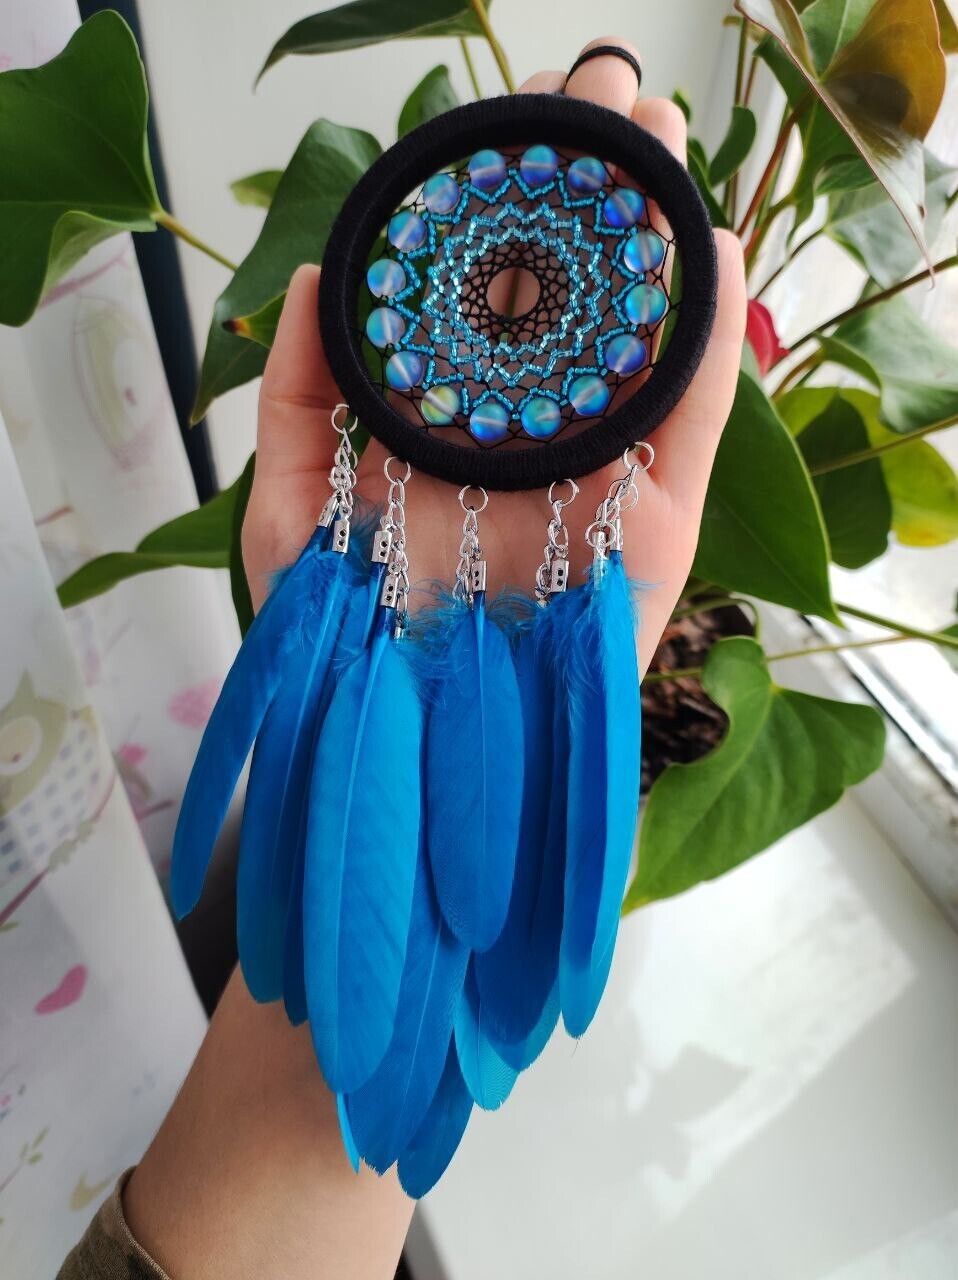 Small Blue Dream Catcher with beads